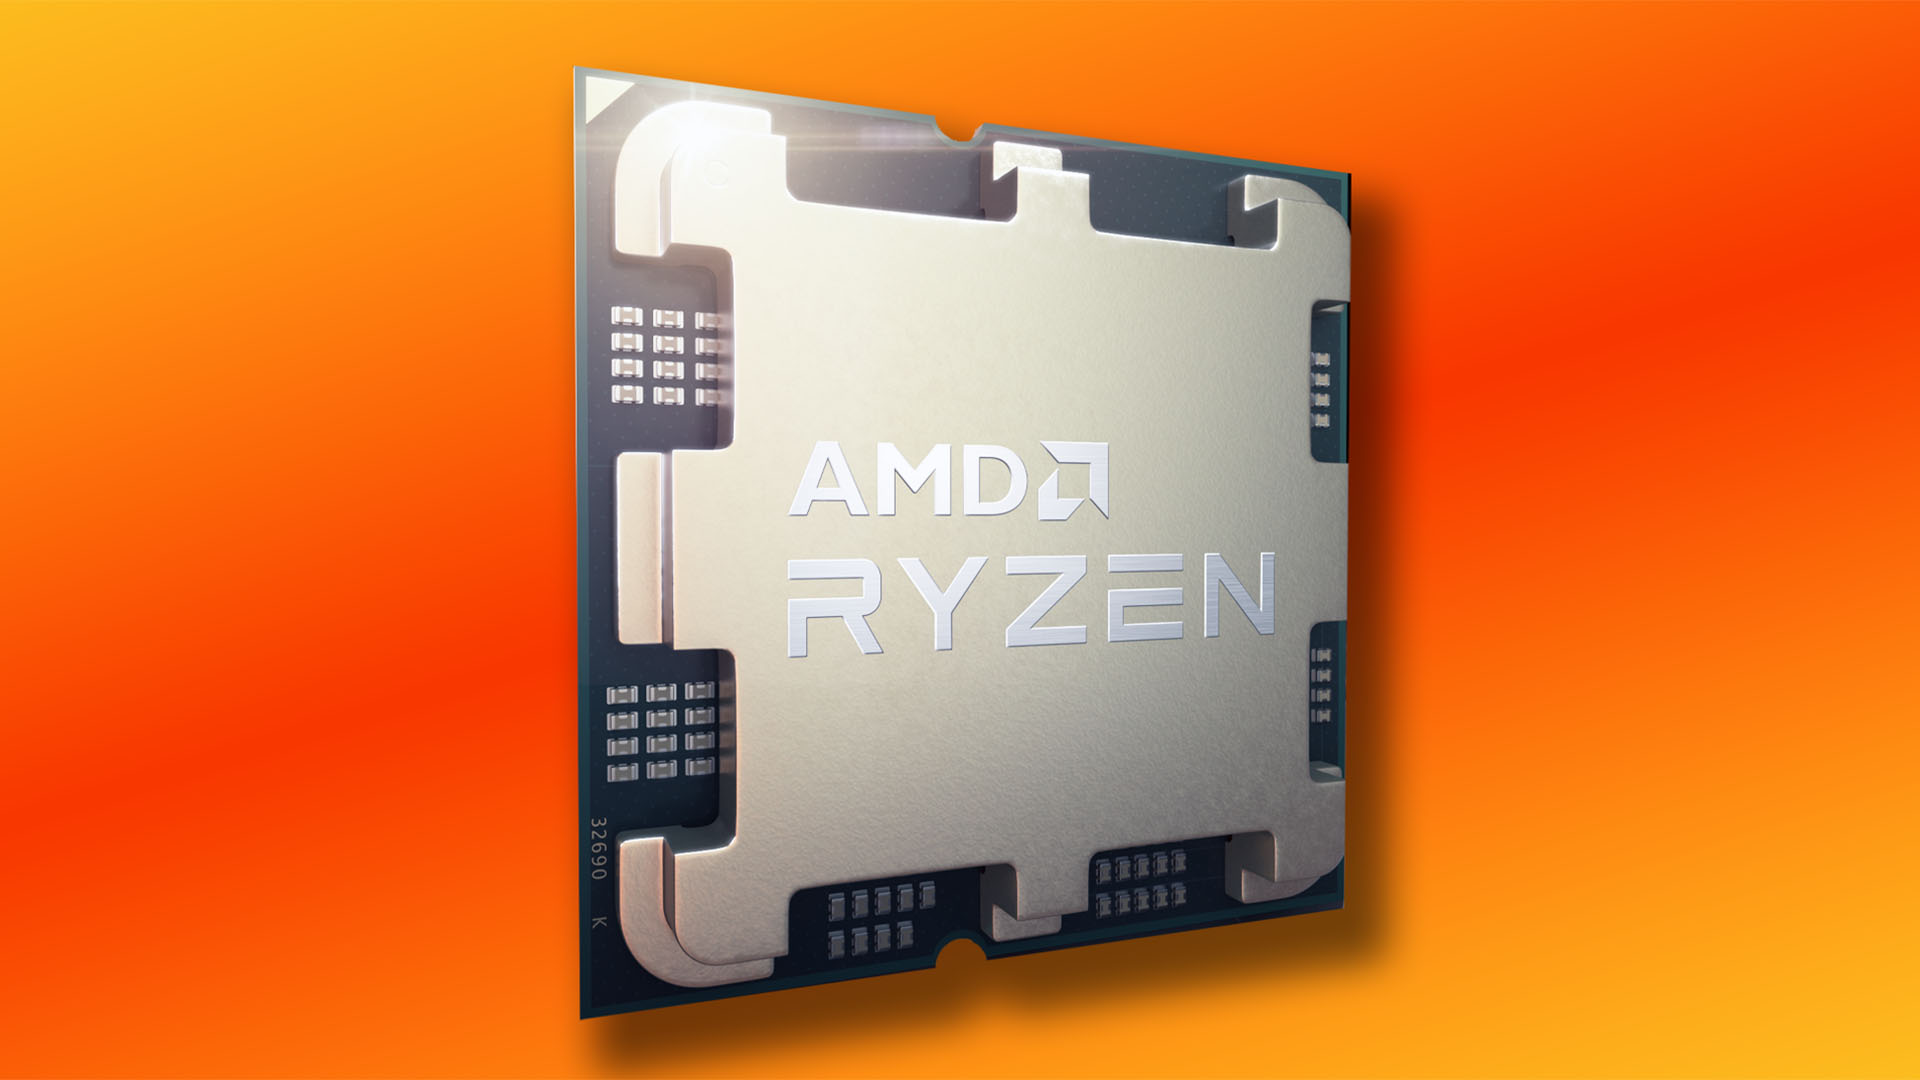 AMD’s new Ryzen CPU name just leaked, and it’s not what you expect